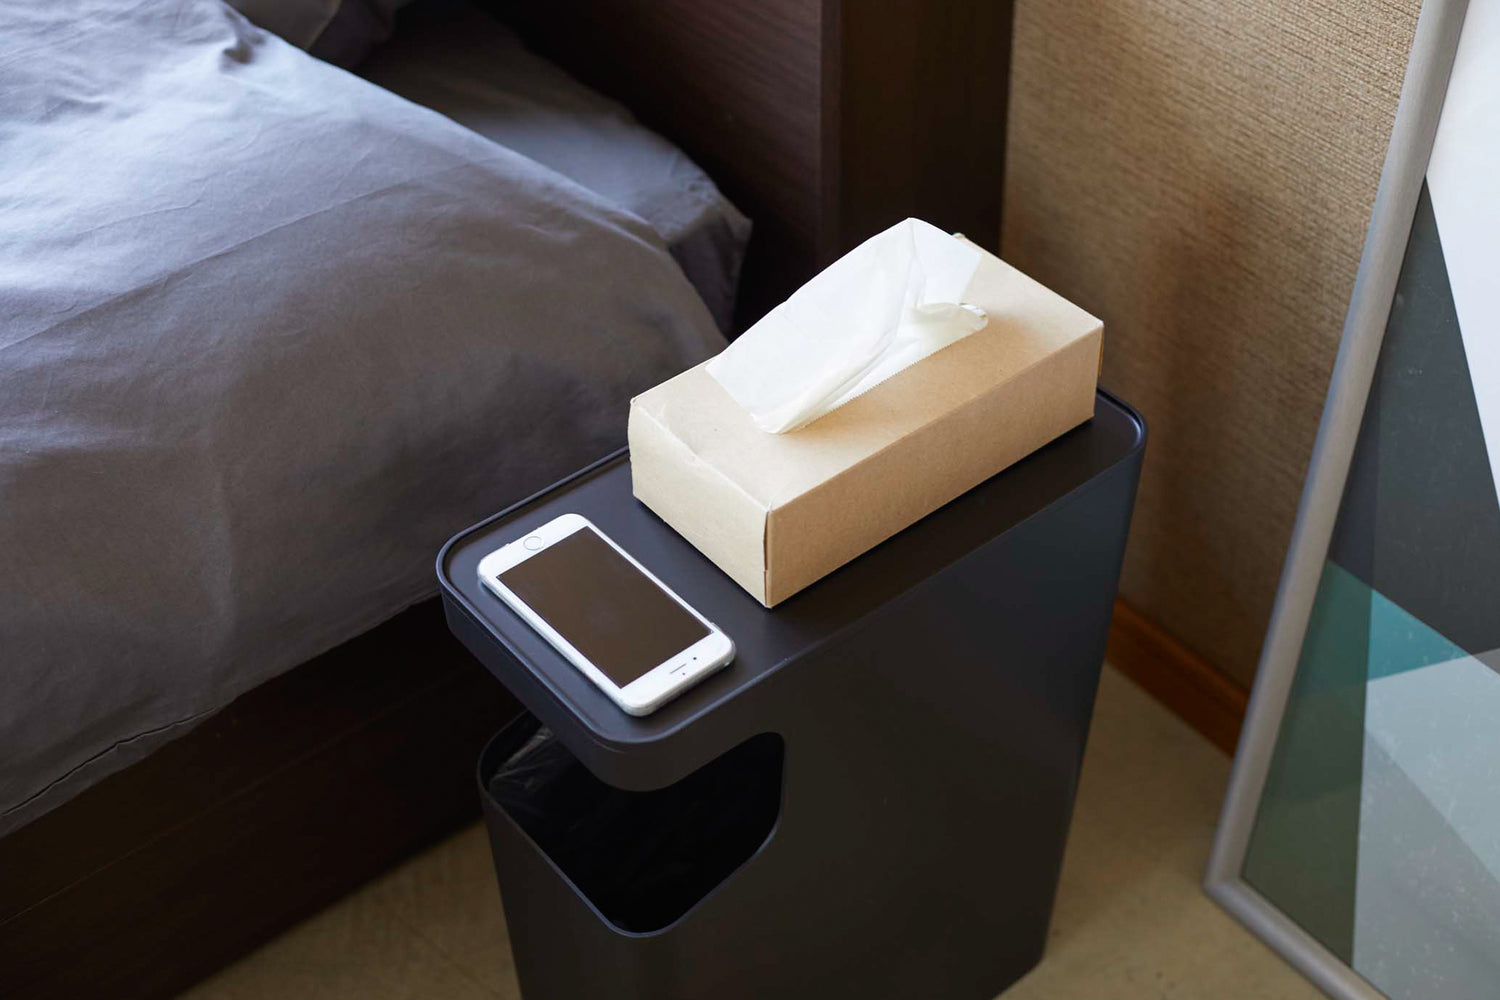 View 11 - Aerial view of black Side Table Trash Can displaying tissue box and phone in bedroom by Yamazaki Home.